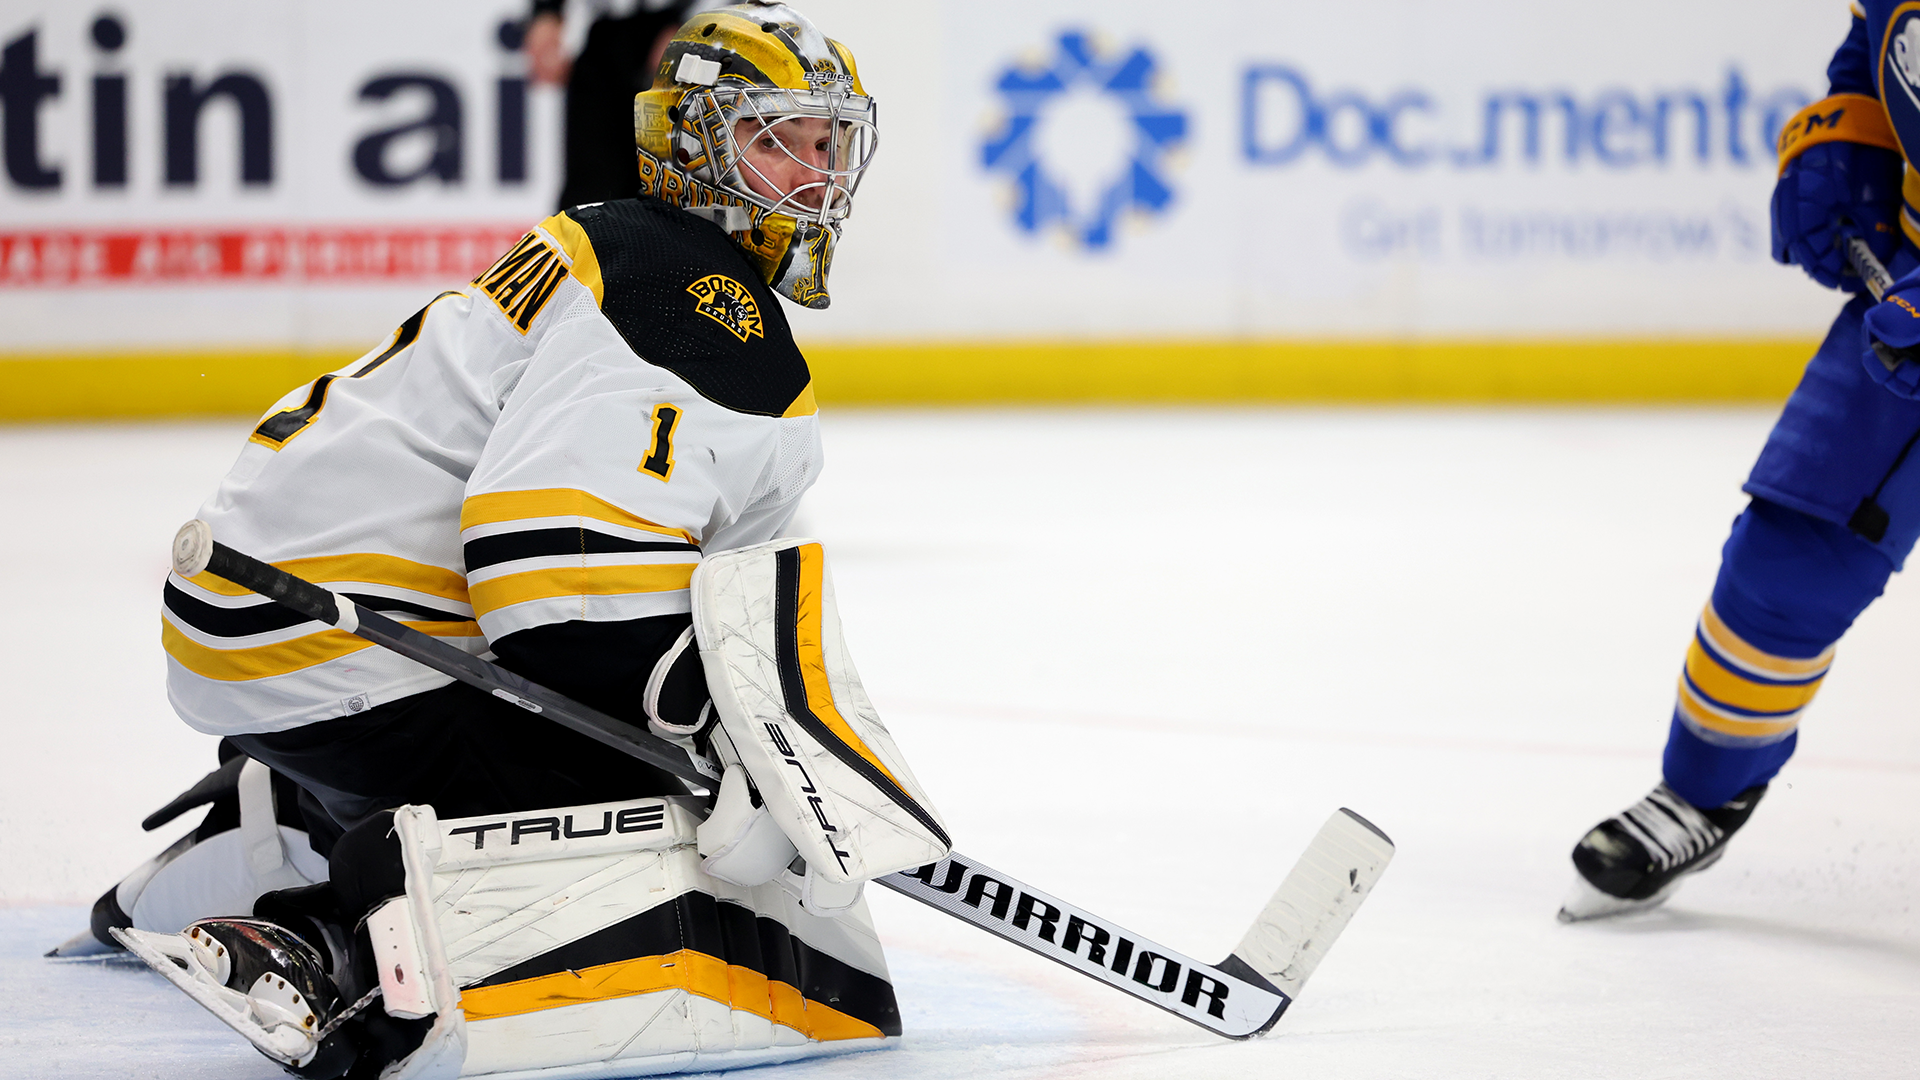 Bruins notebook: Former UMaine goalie Jeremy Swayman will get his chance –  just not yet